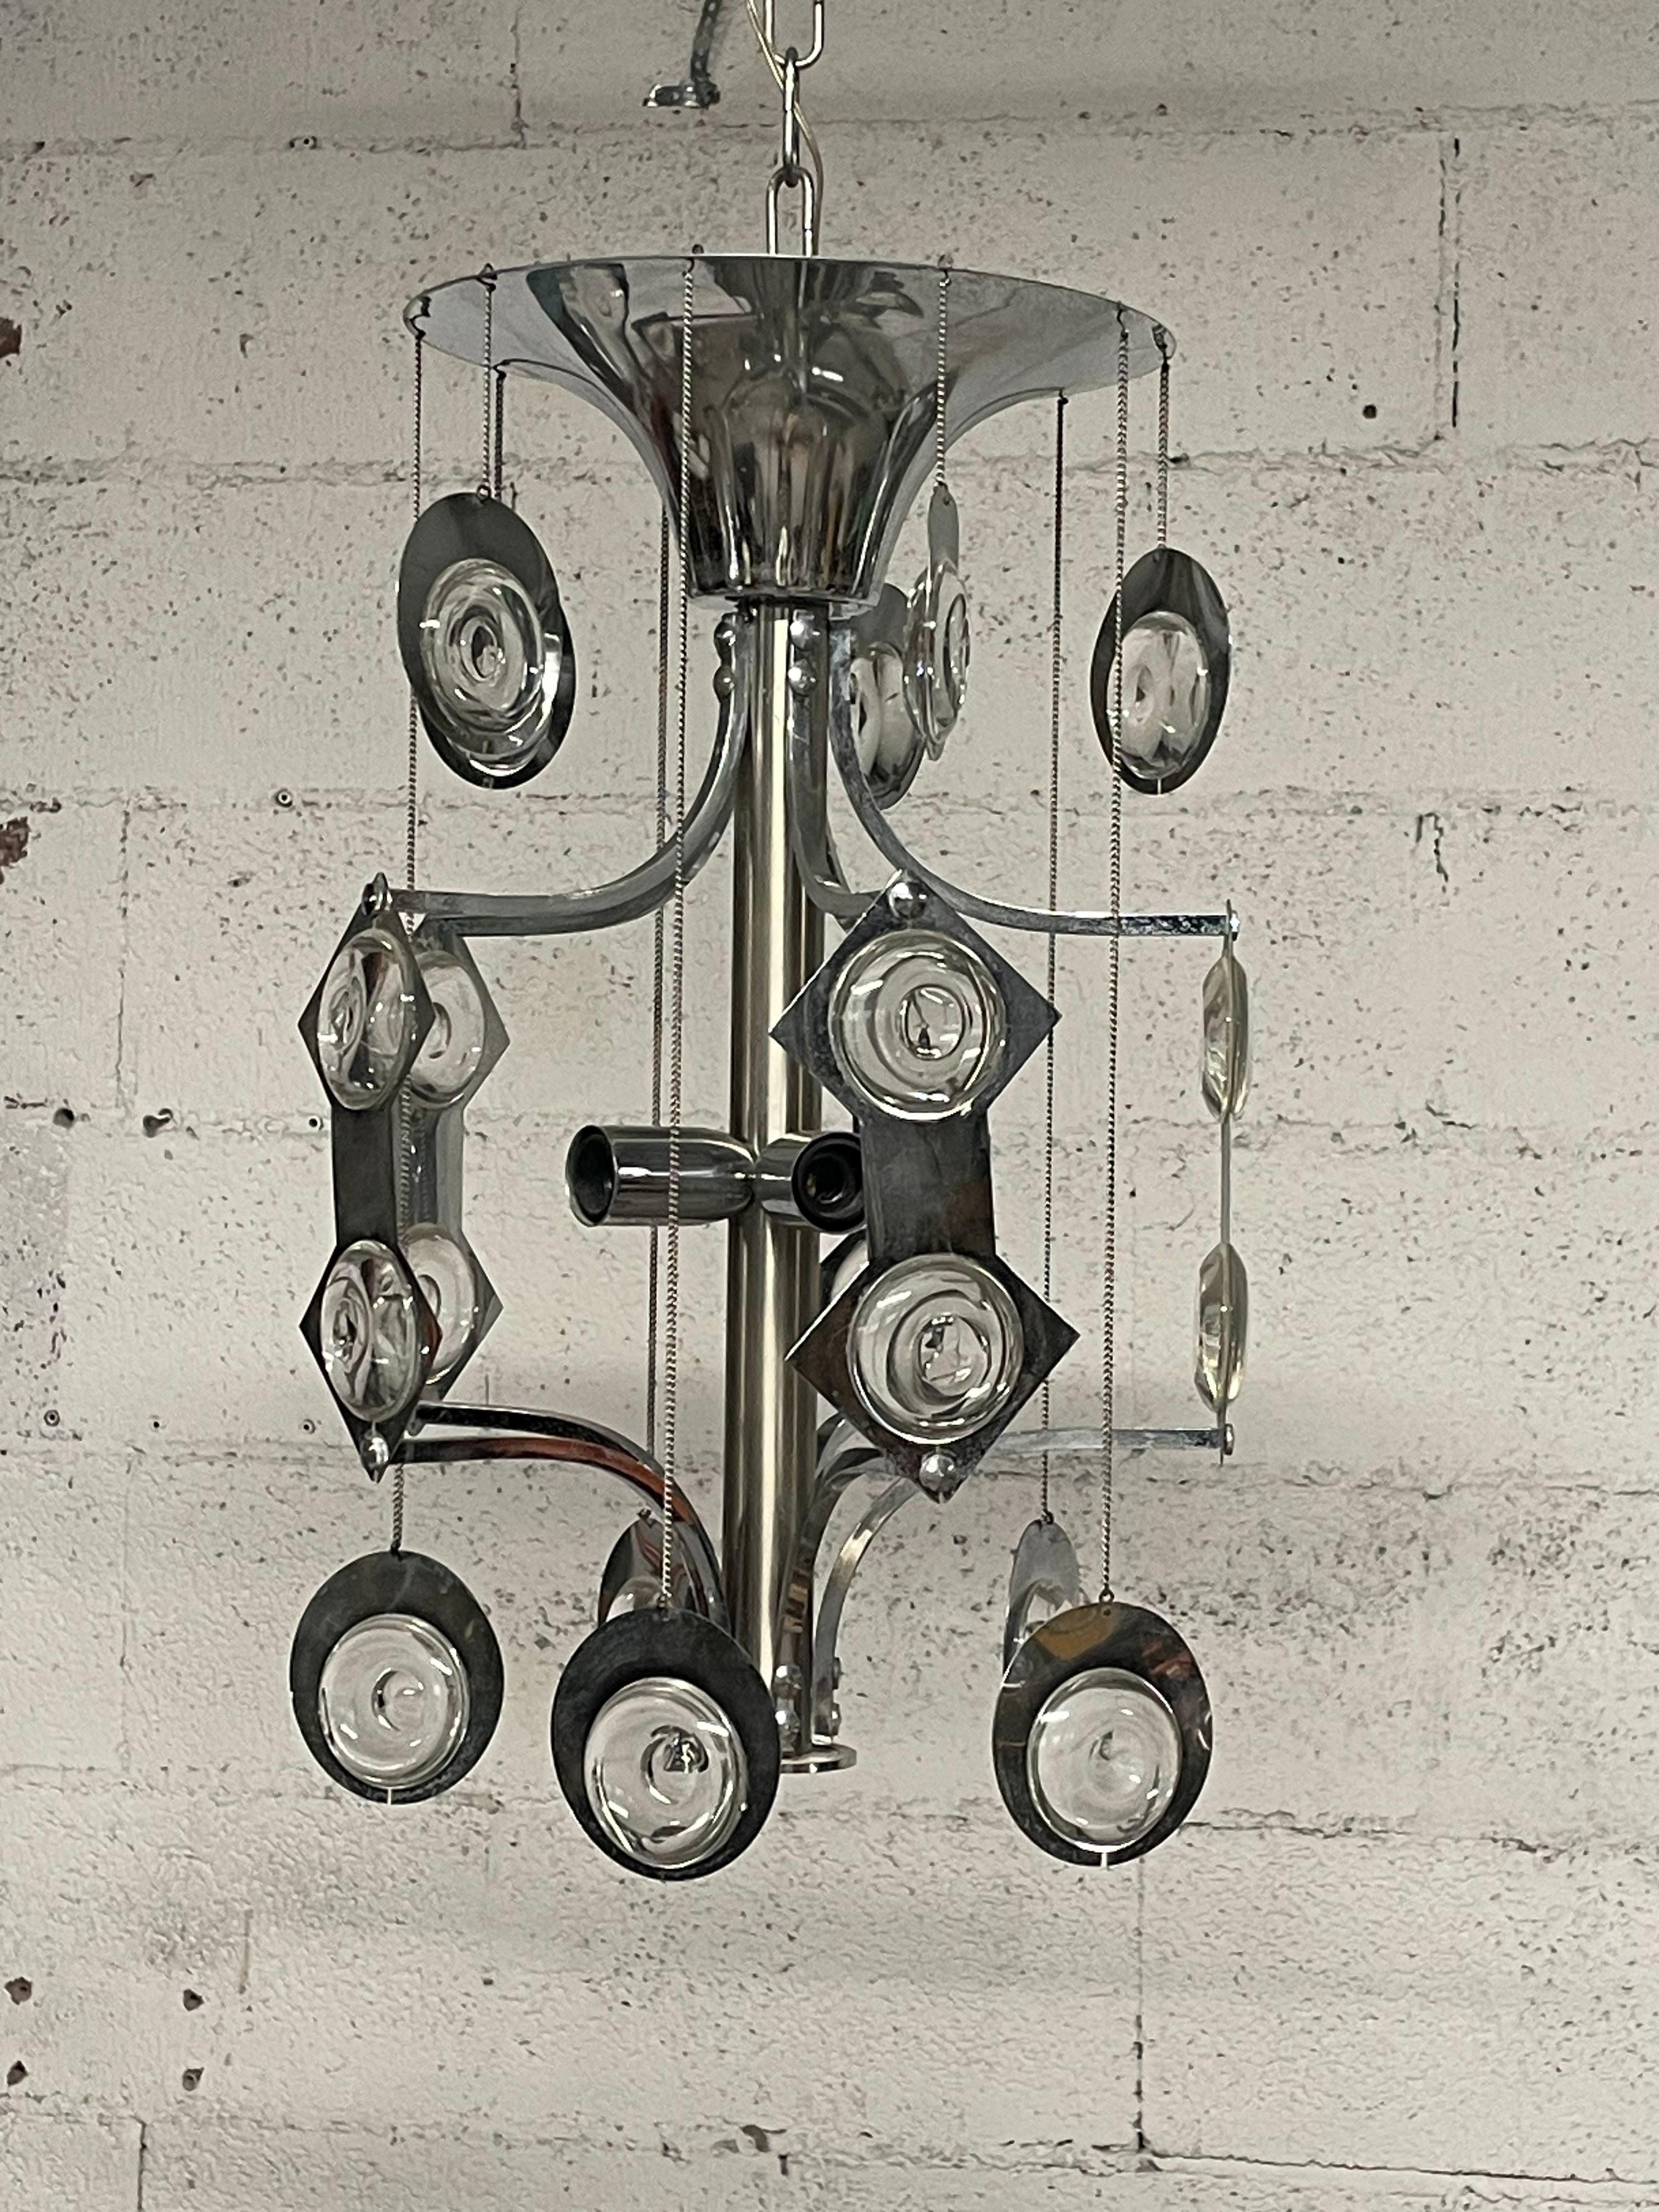 Rare pendant lamp designed by Oscar Torlasco in the 1970s and produced by Esperia, a Tuscan company that has been making  high-end decorative lighting.
Oscar Torlasco (Rome, 1934-2004) was an Italian designer specializing in lighting. In 1959 he won